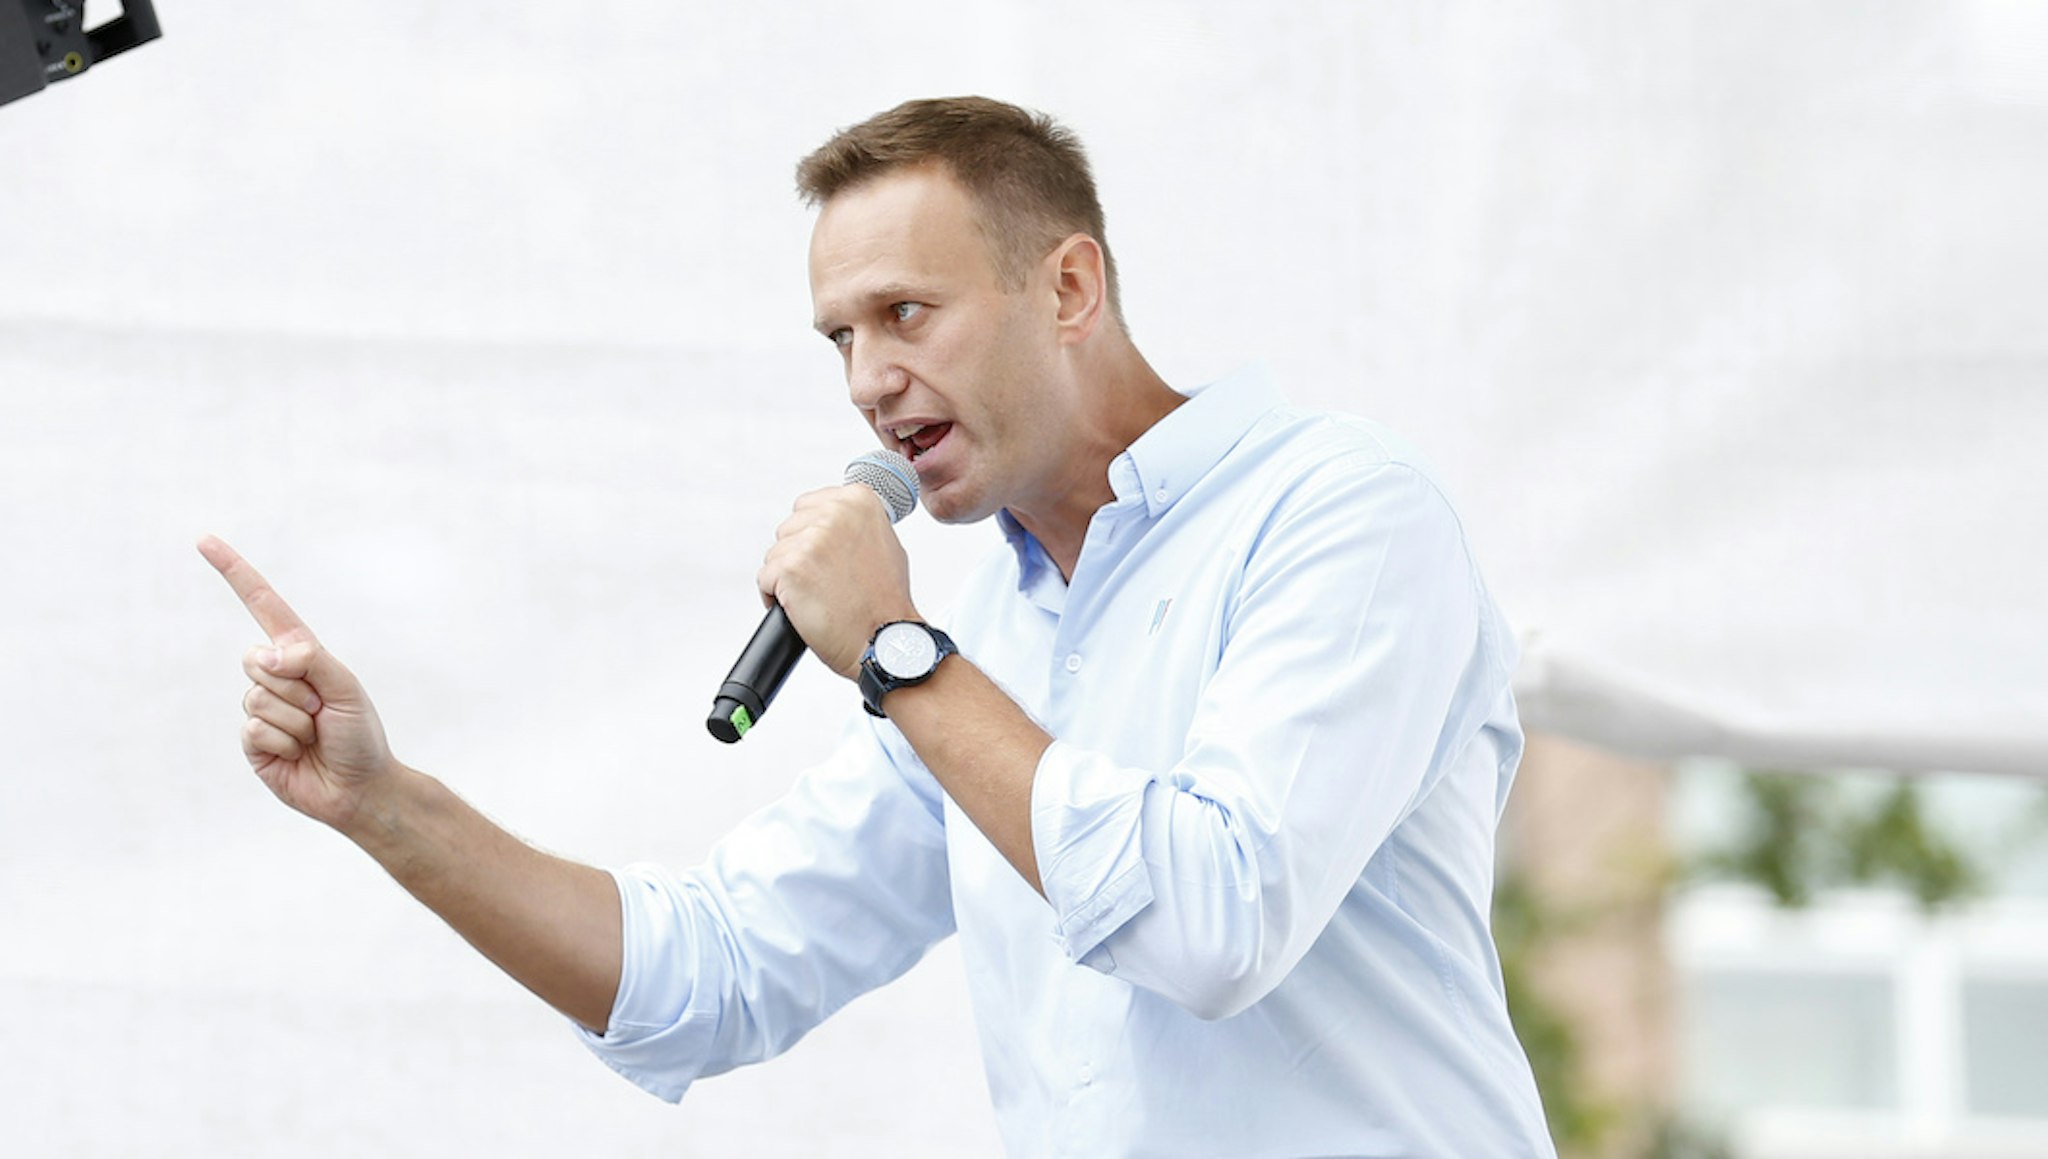 Russian opposition leader Alexei Navalny addresses demonstrators during a rally to support opposition and independent candidates after authorities refused to register them for September elections to the Moscow City Duma, Moscow, July 20, 2019. (Photo by Maxim ZMEYEV / AFP via Getty Images)